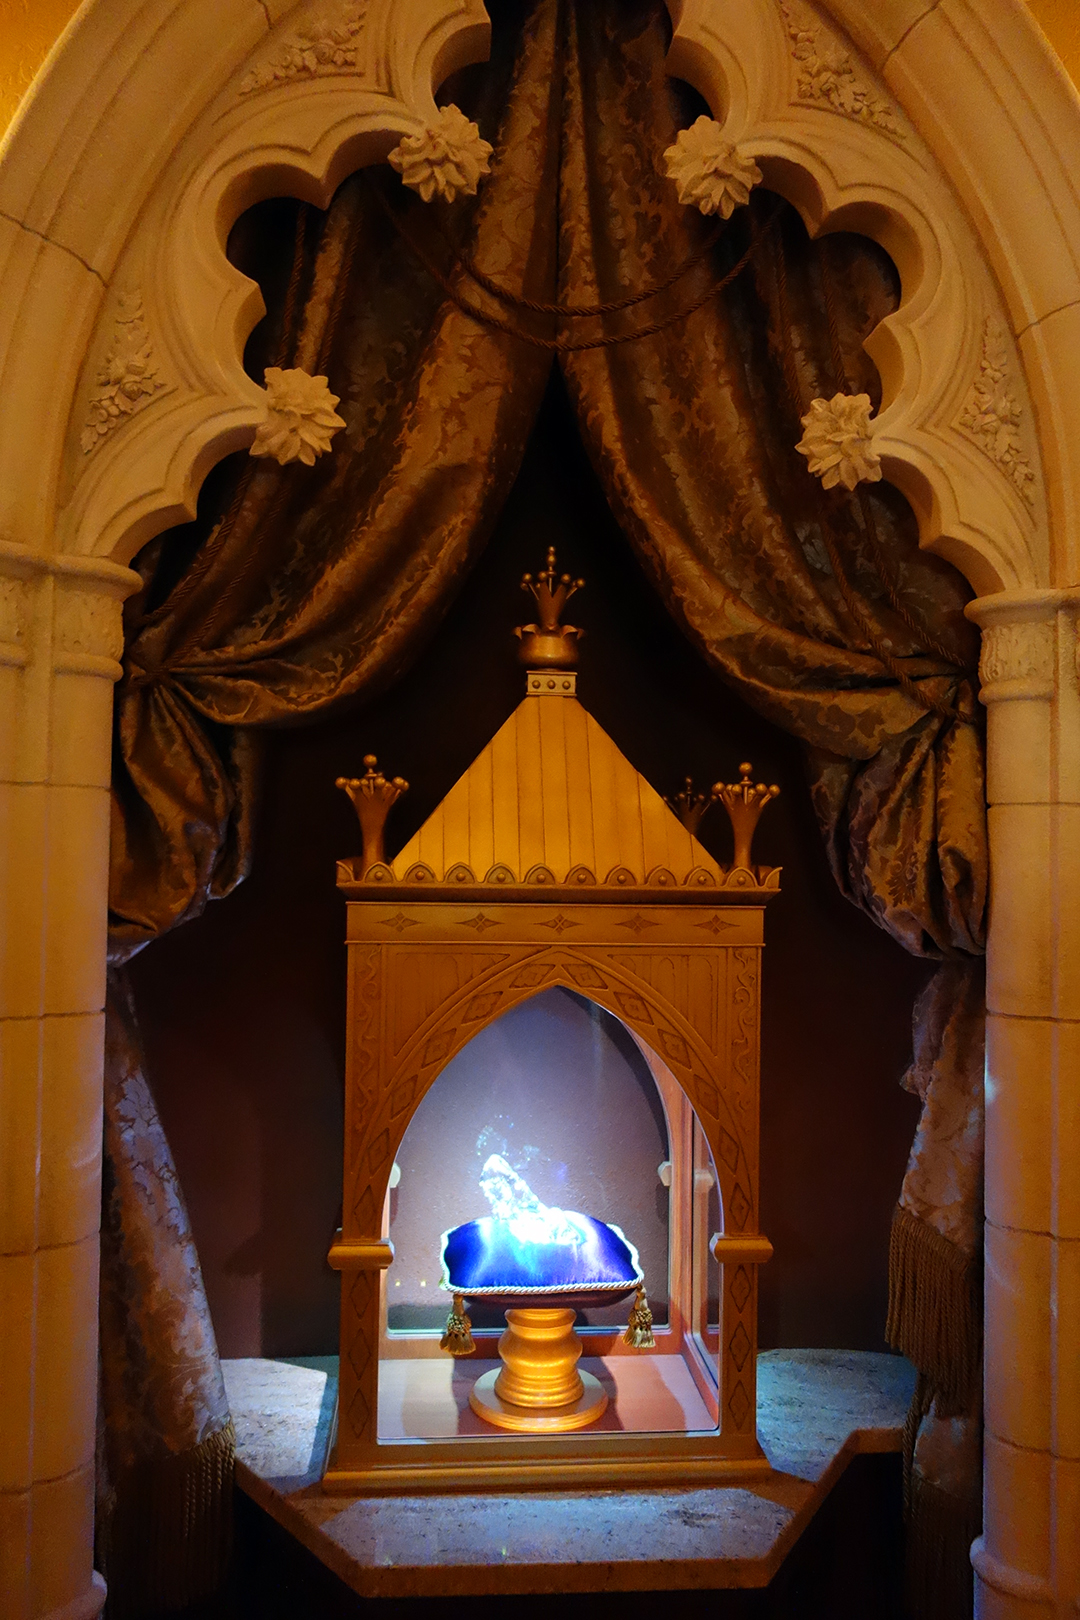 The glass slipper from the movie Cinderella